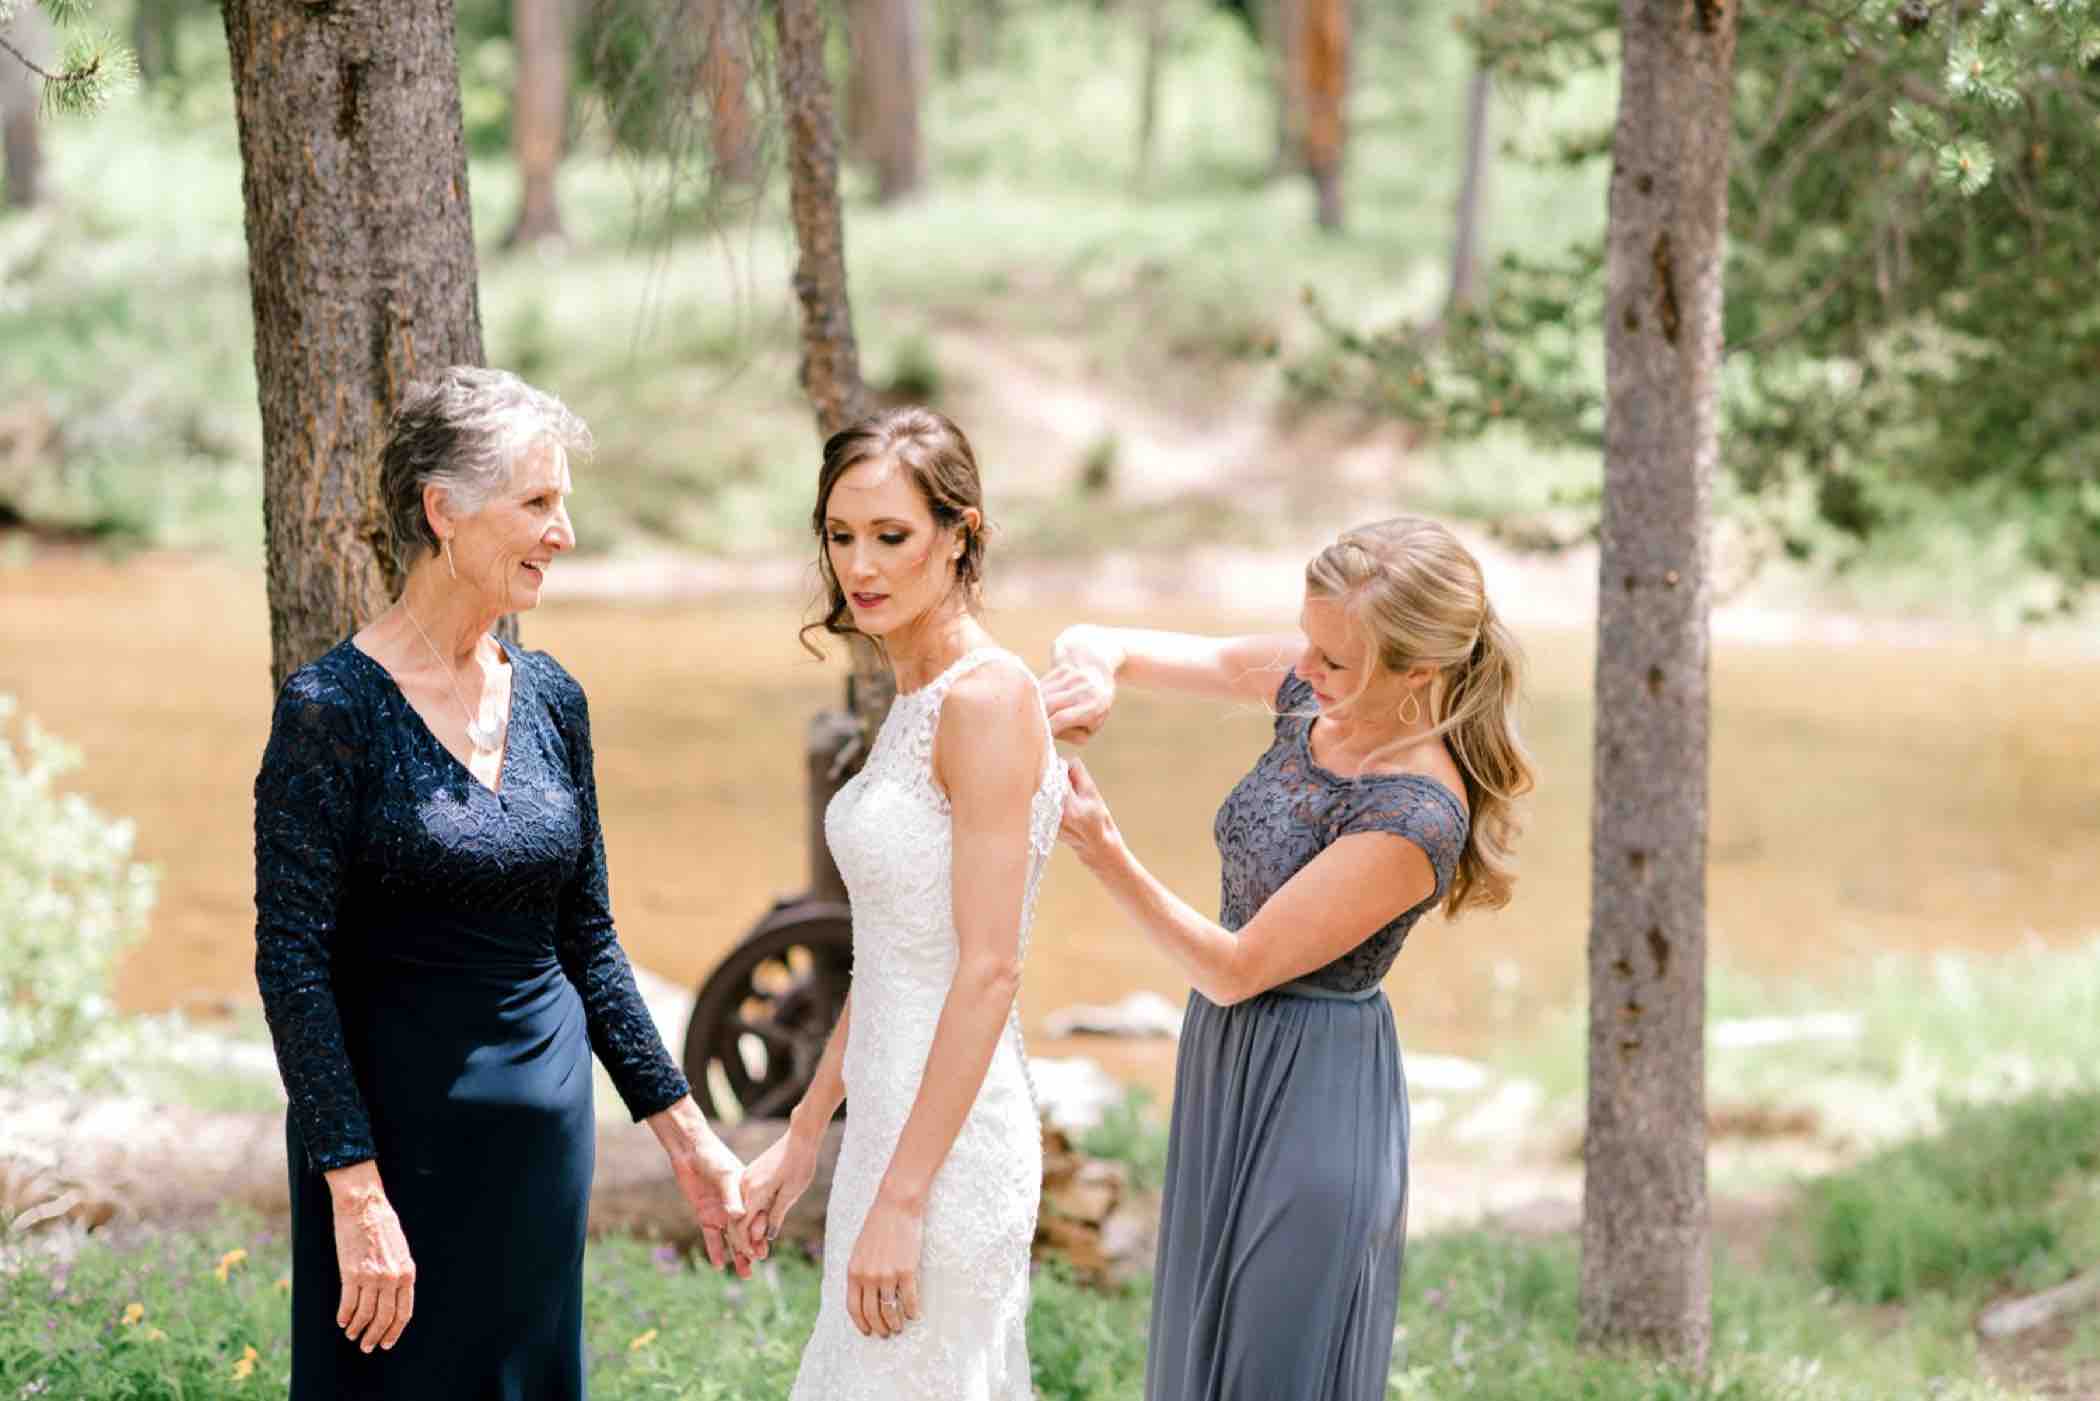 Sallie chose to get ready outdoors for her wedding at Piney River Ranch in Vail Colorado. Photo by Ali and Garrett, Romantic, Adventurous, Nostalgic Wedding Photographers.